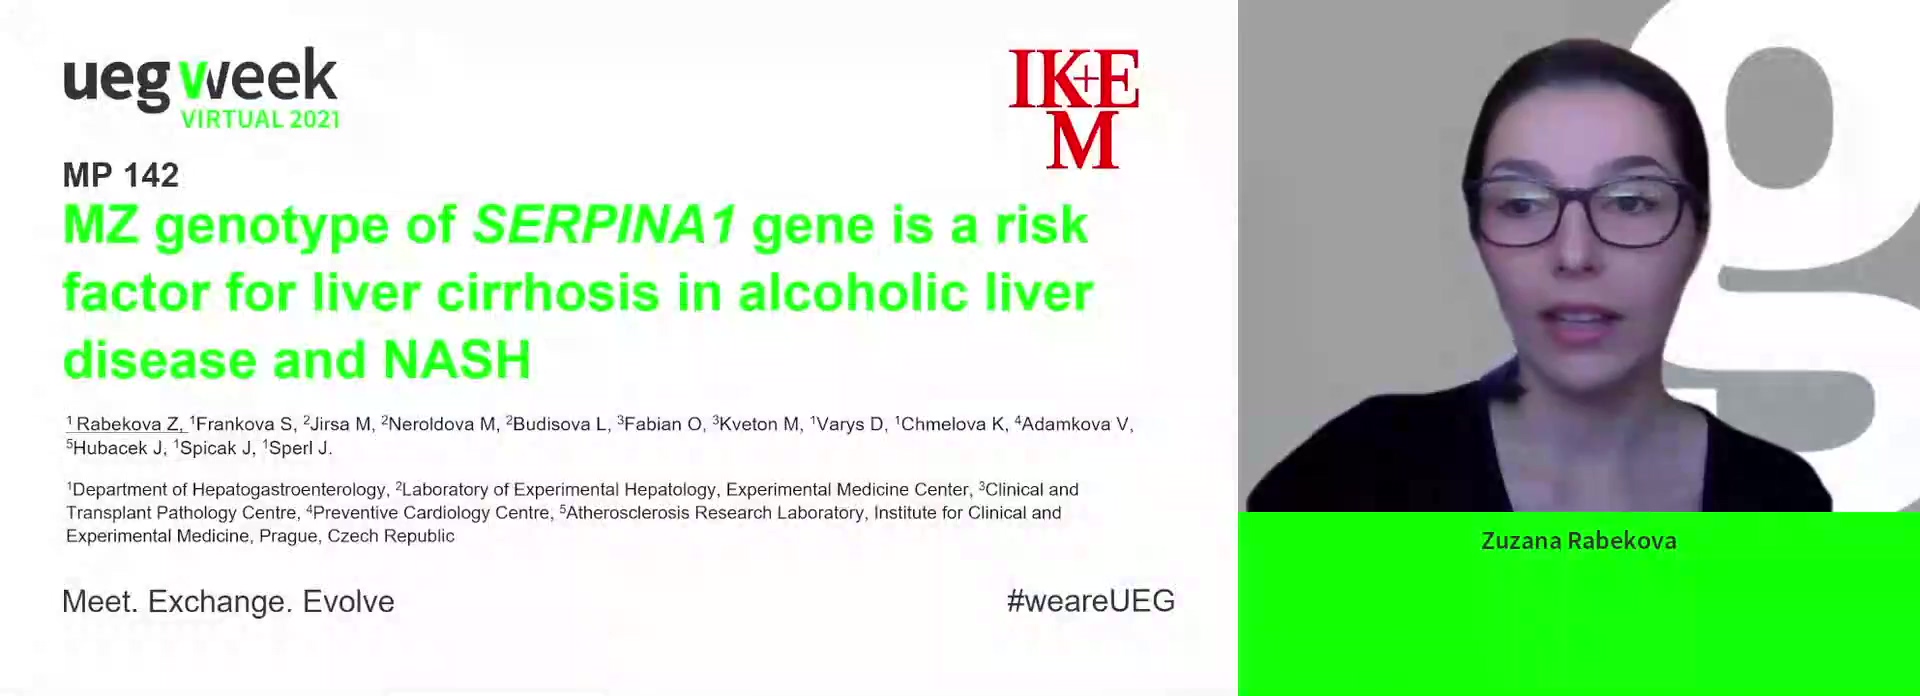 MZ GENOTYPE OF SERPINA1 GENE IS A RISK FACTOR FOR LIVER CIRRHOSIS IN ALCOHOLIC LIVER DISEASE AND NASH